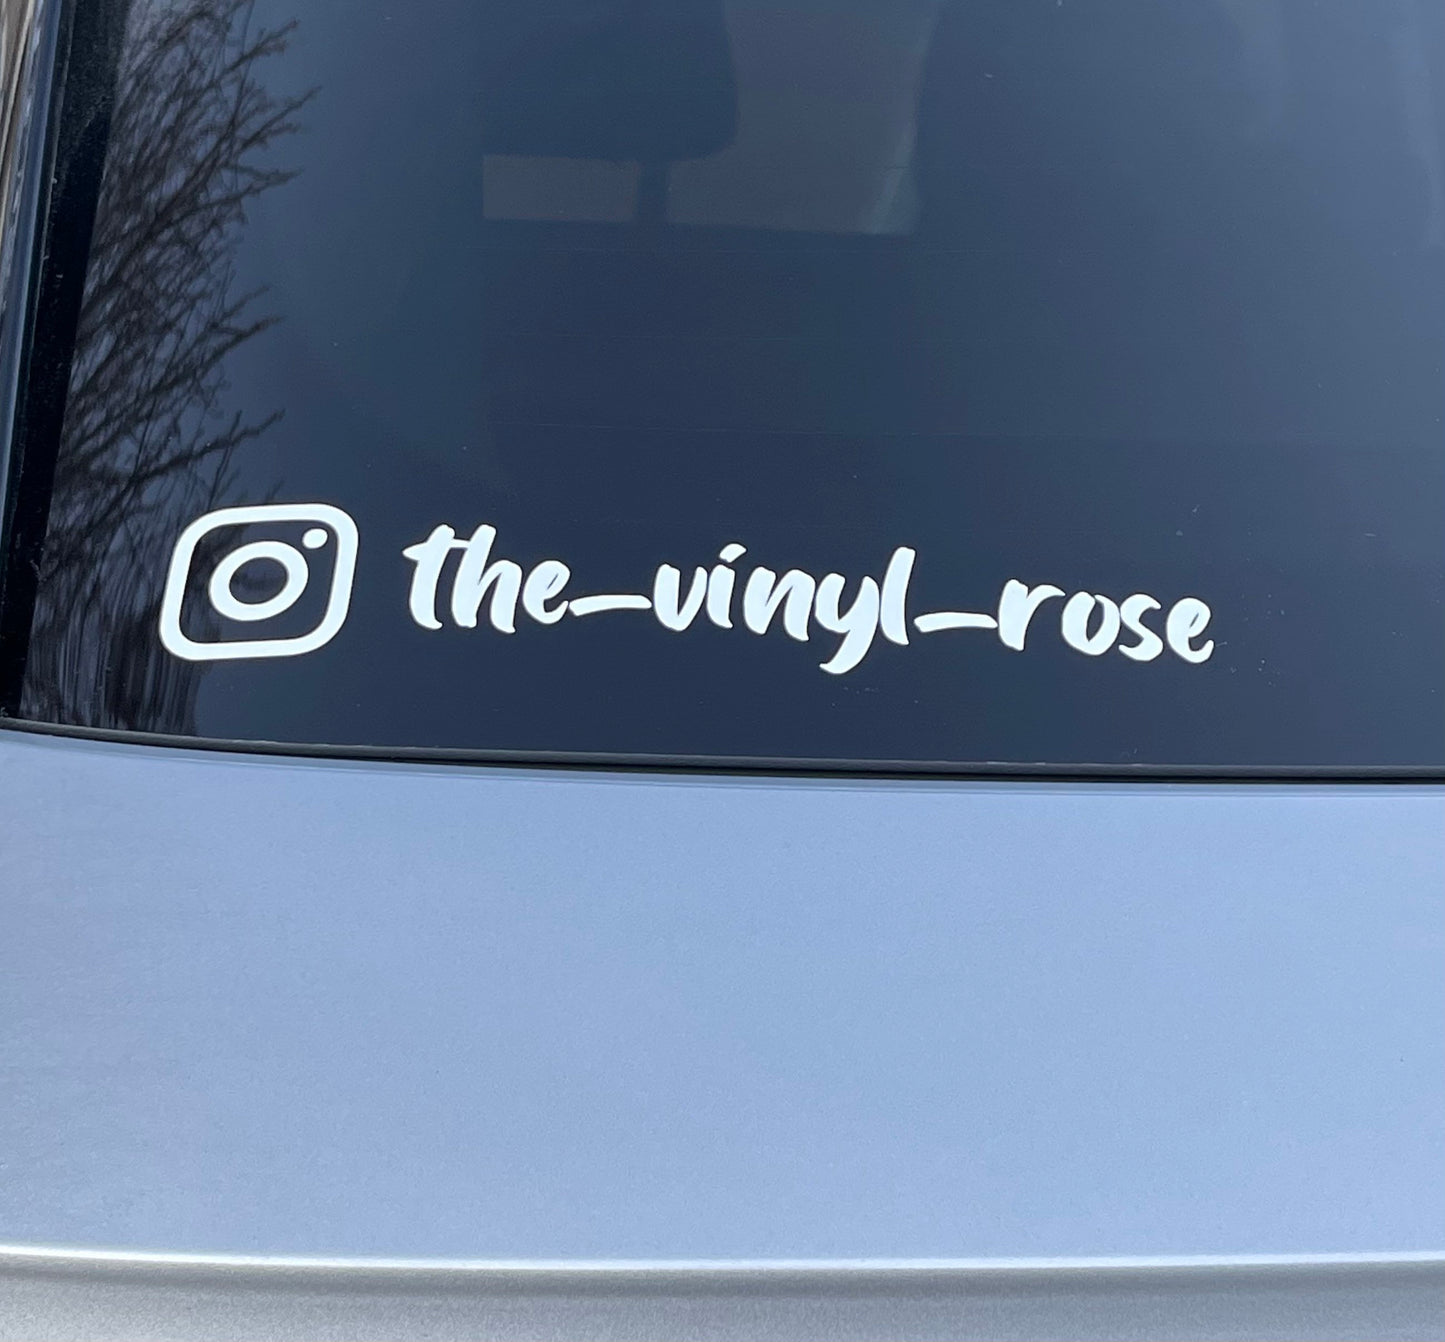 personalized car decal, instagram car decal, small business owner decal, social media decal, custom instagram name personalized